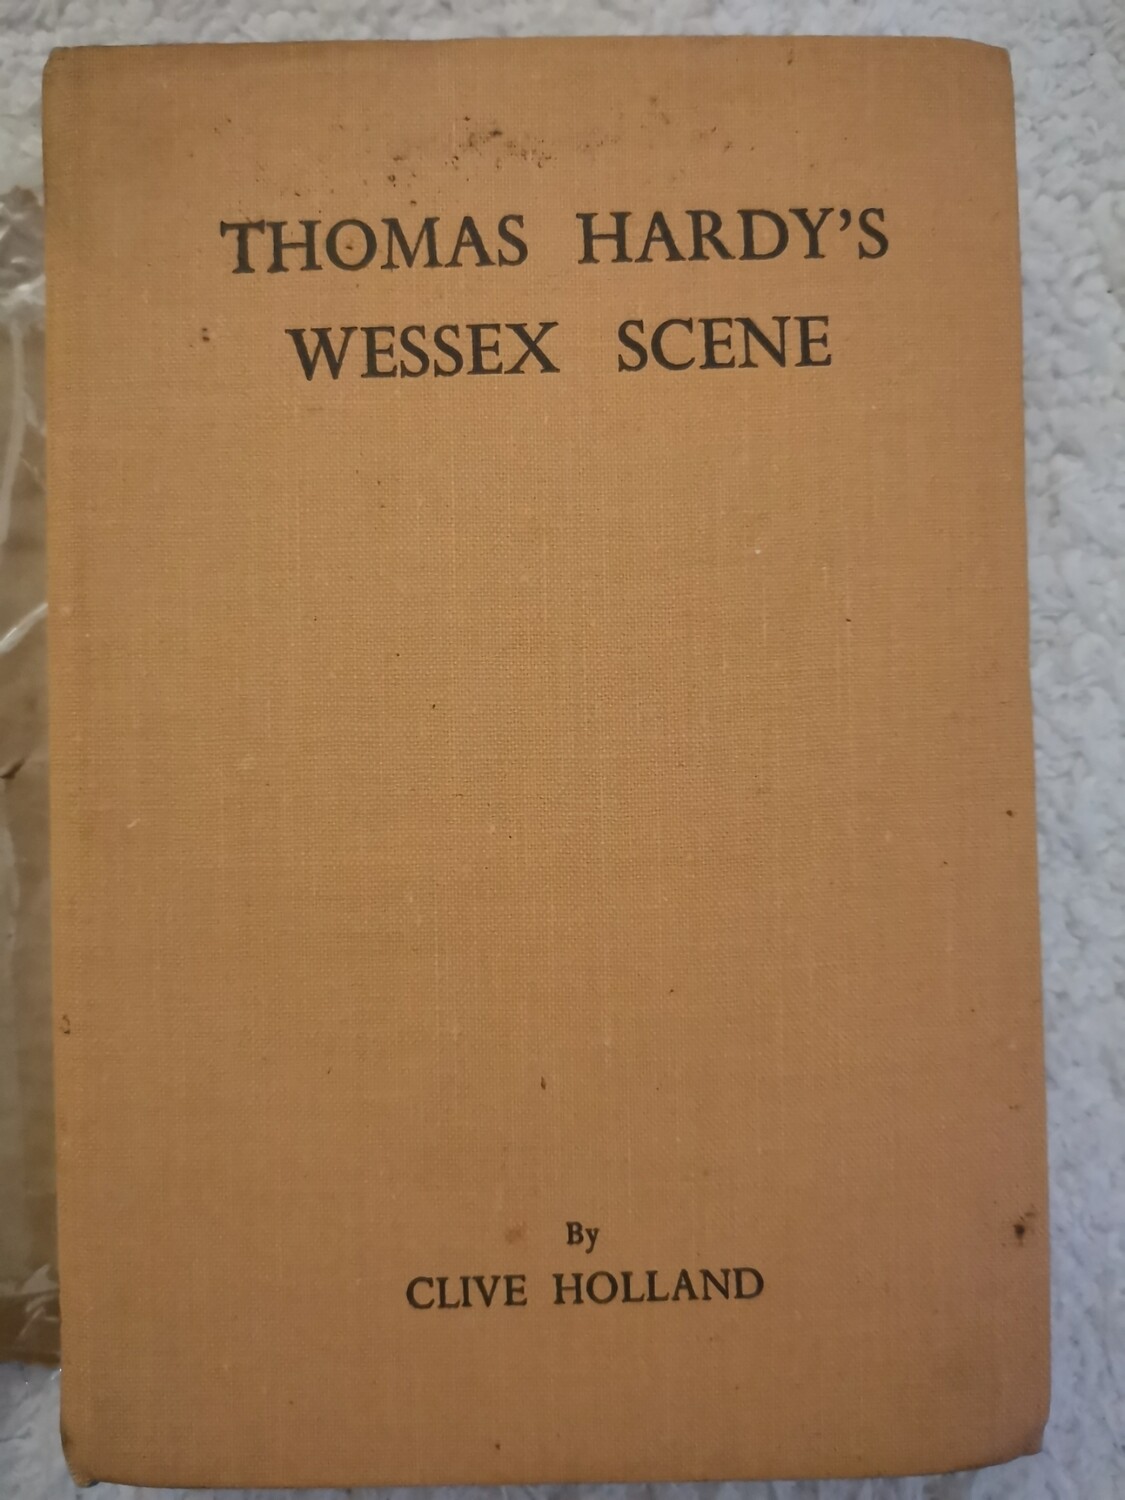 Thomas Hardy's Wessex scene, Clive Holland